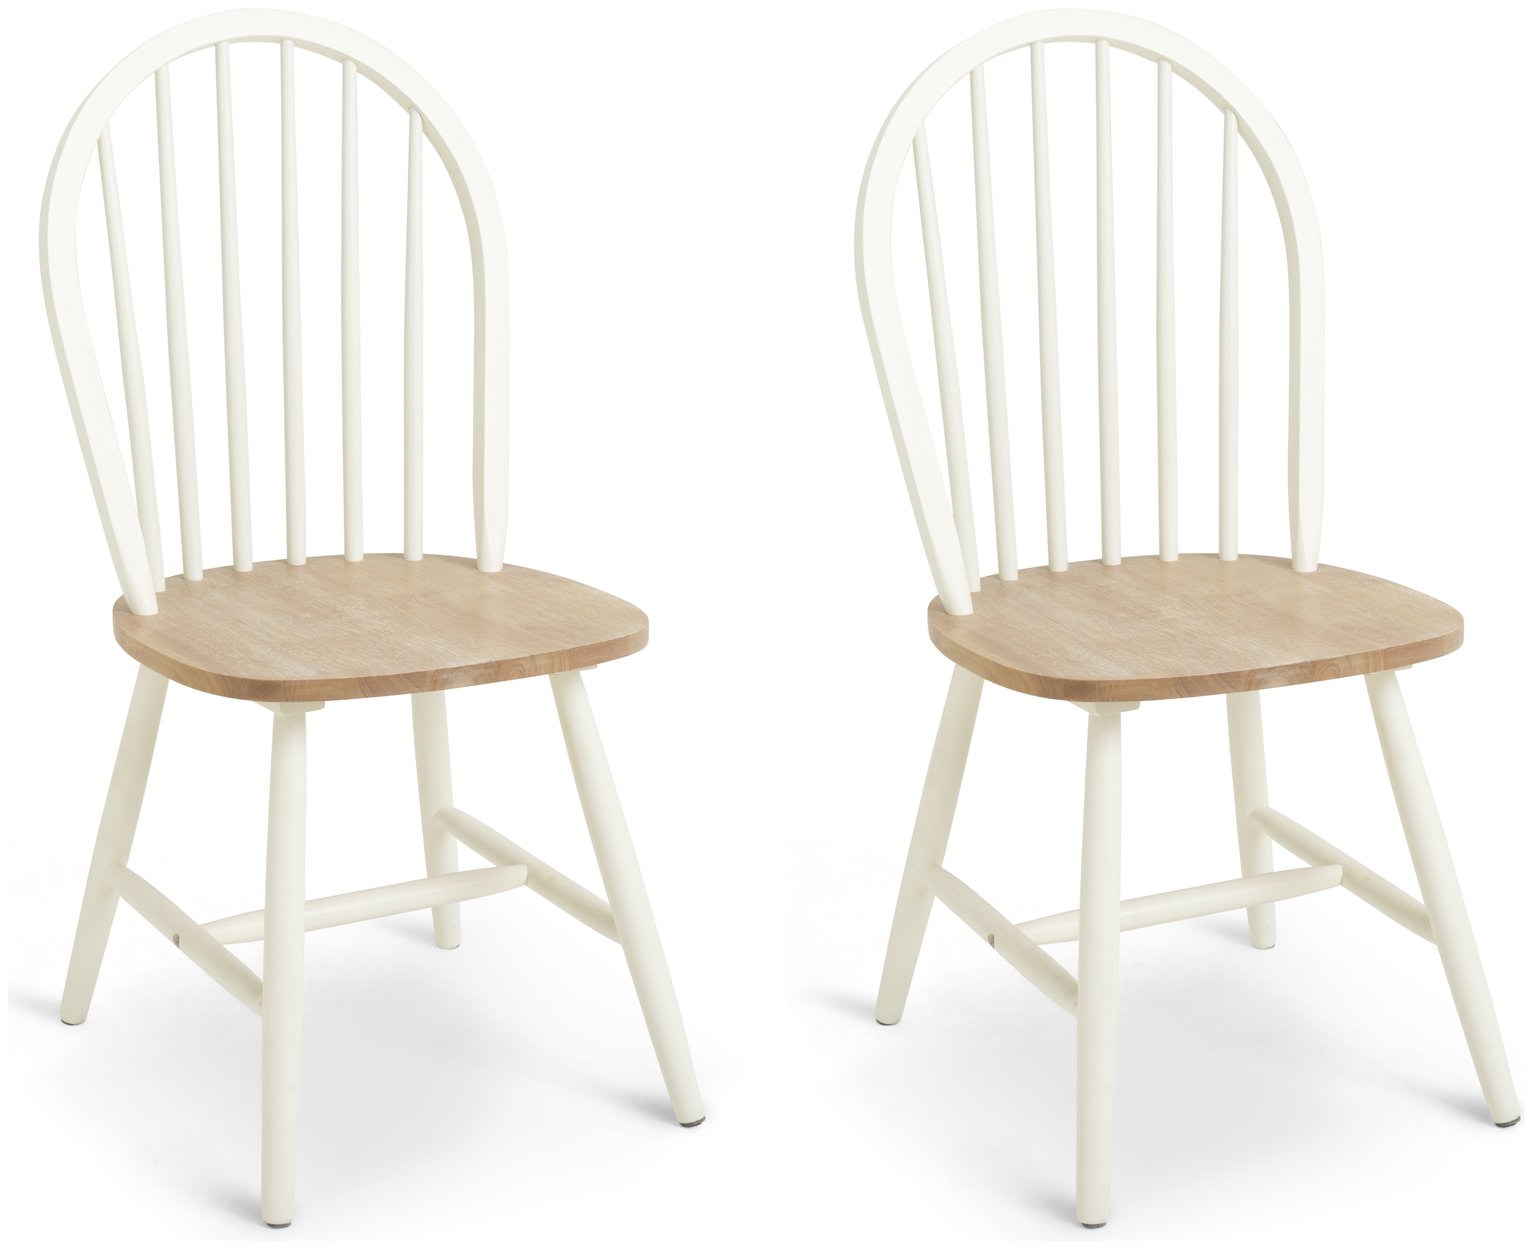 Habitat Burford Pair of Solid Wood Dining Chairs - White